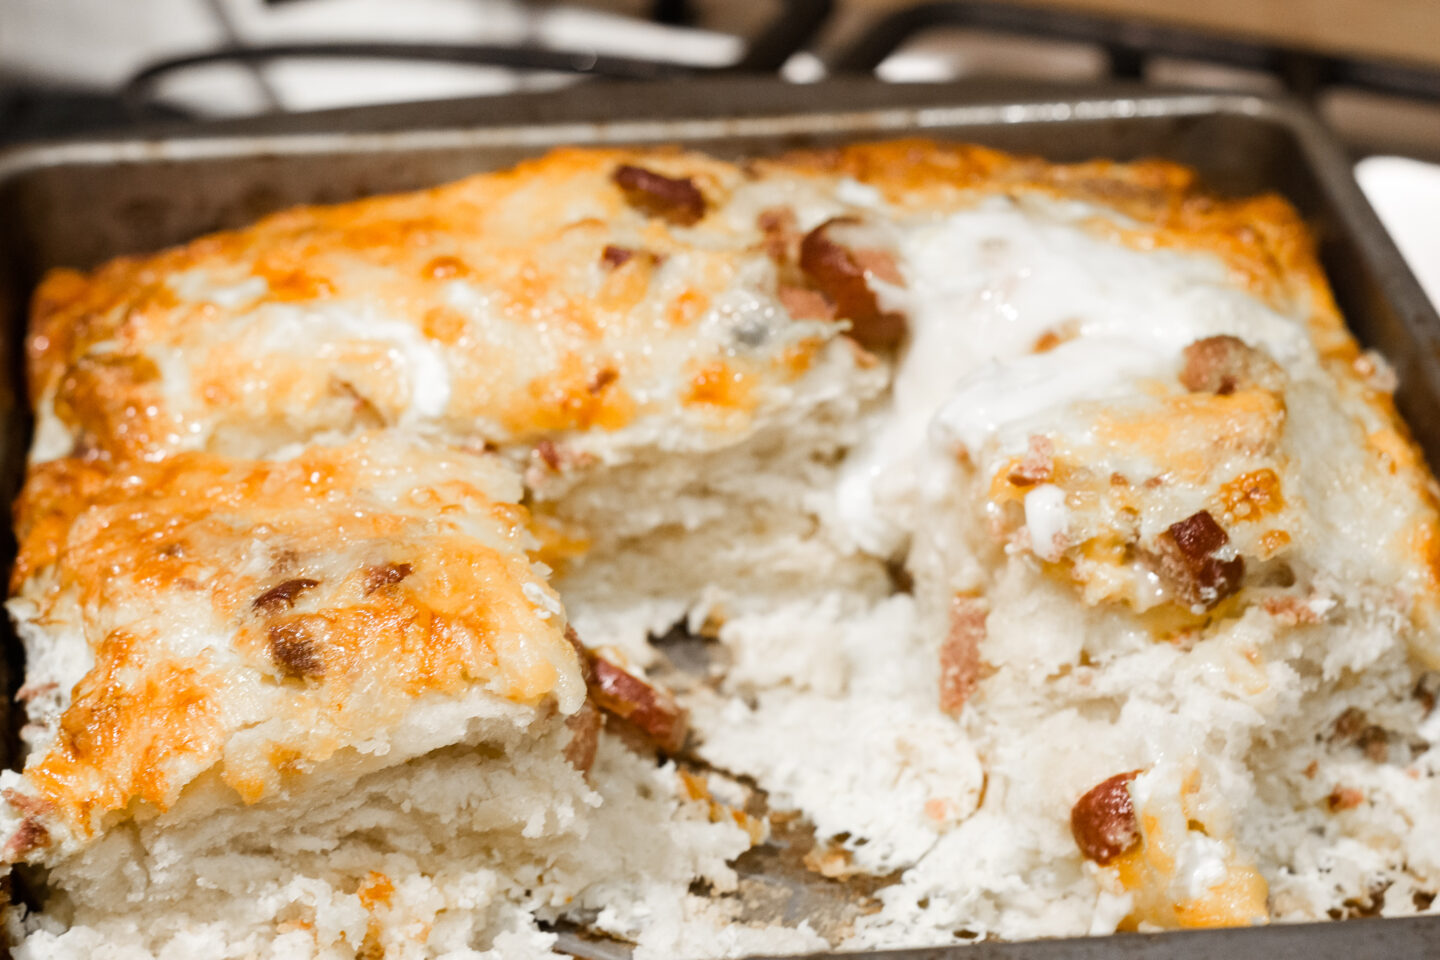 Eggs, Sausage, and Biscuit Casserole